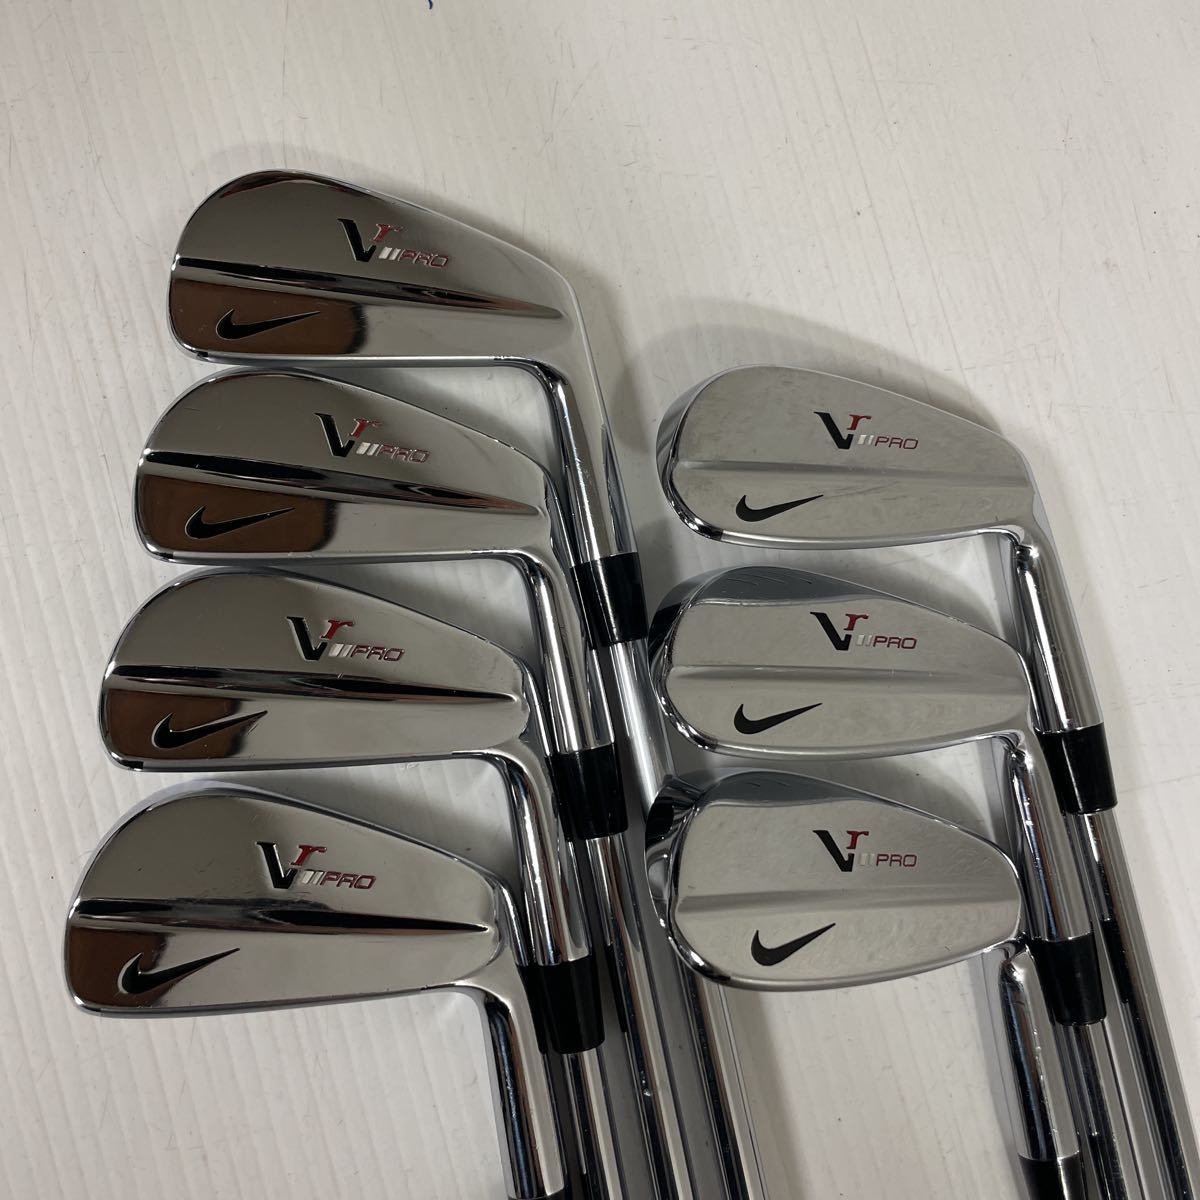 NIKE VR PRO BLADE FORGED アイアンセット 4I～PW 7本セット DYNAMIC 